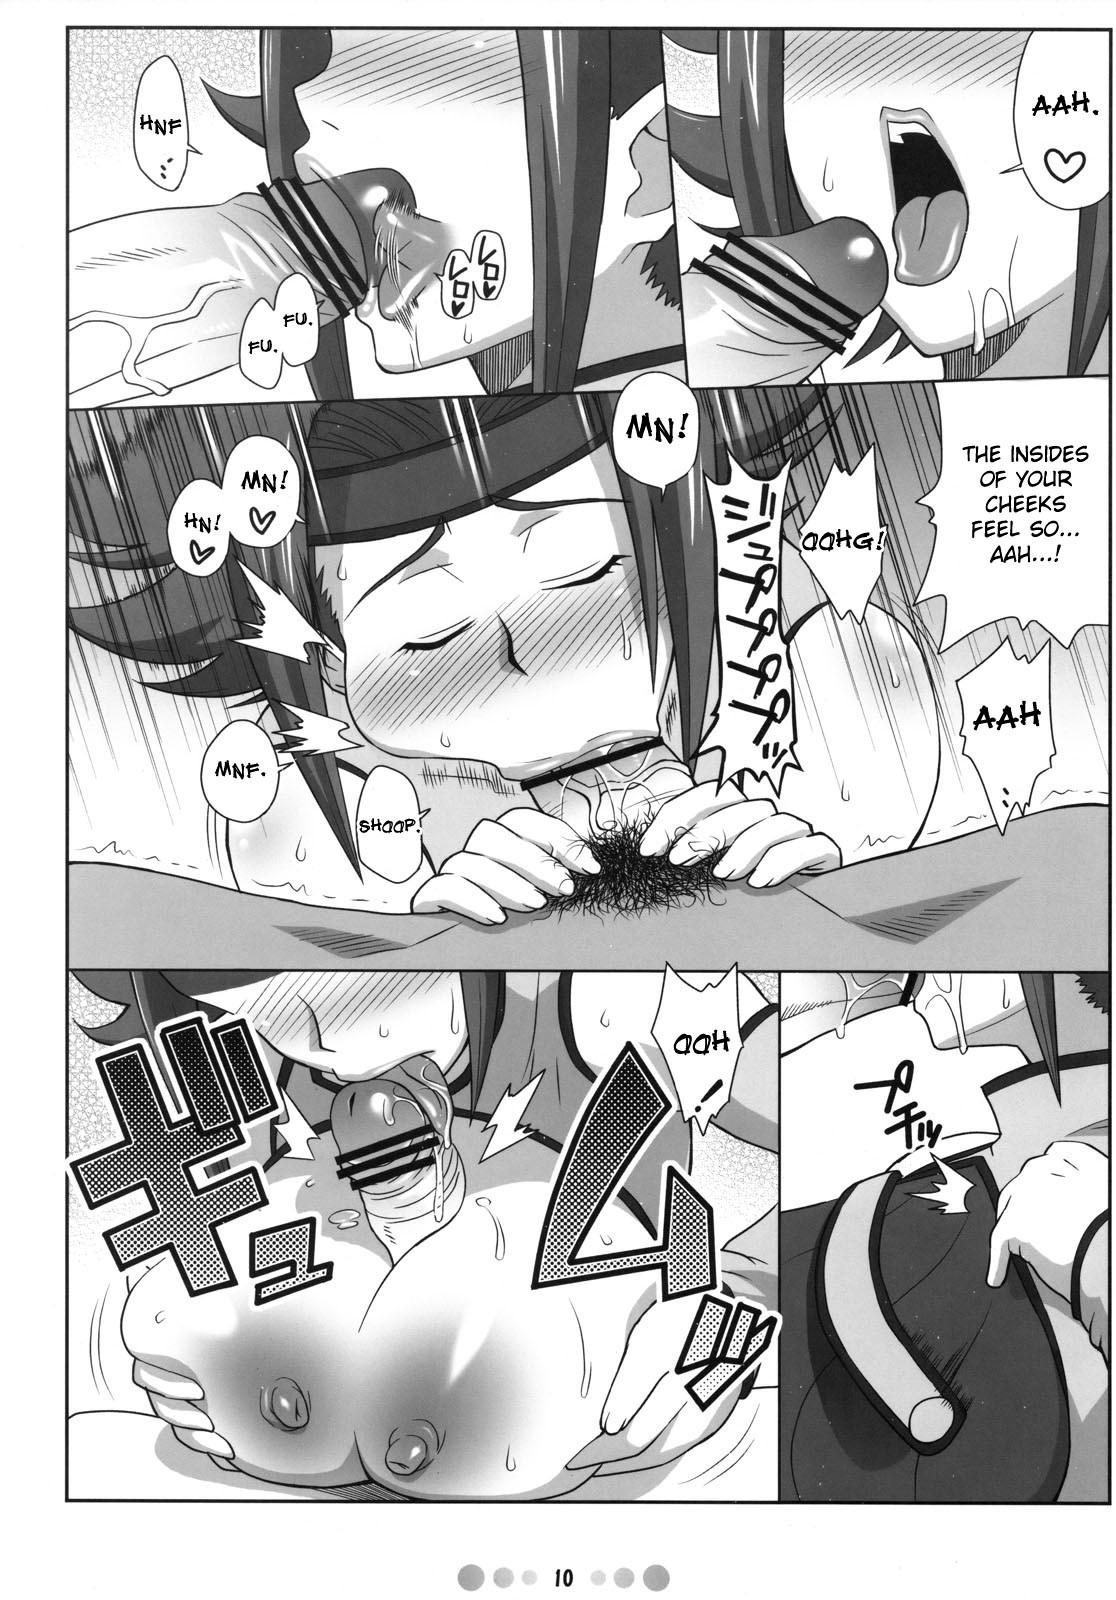 Student Eleven PM - Code geass Gay Bang - Page 9